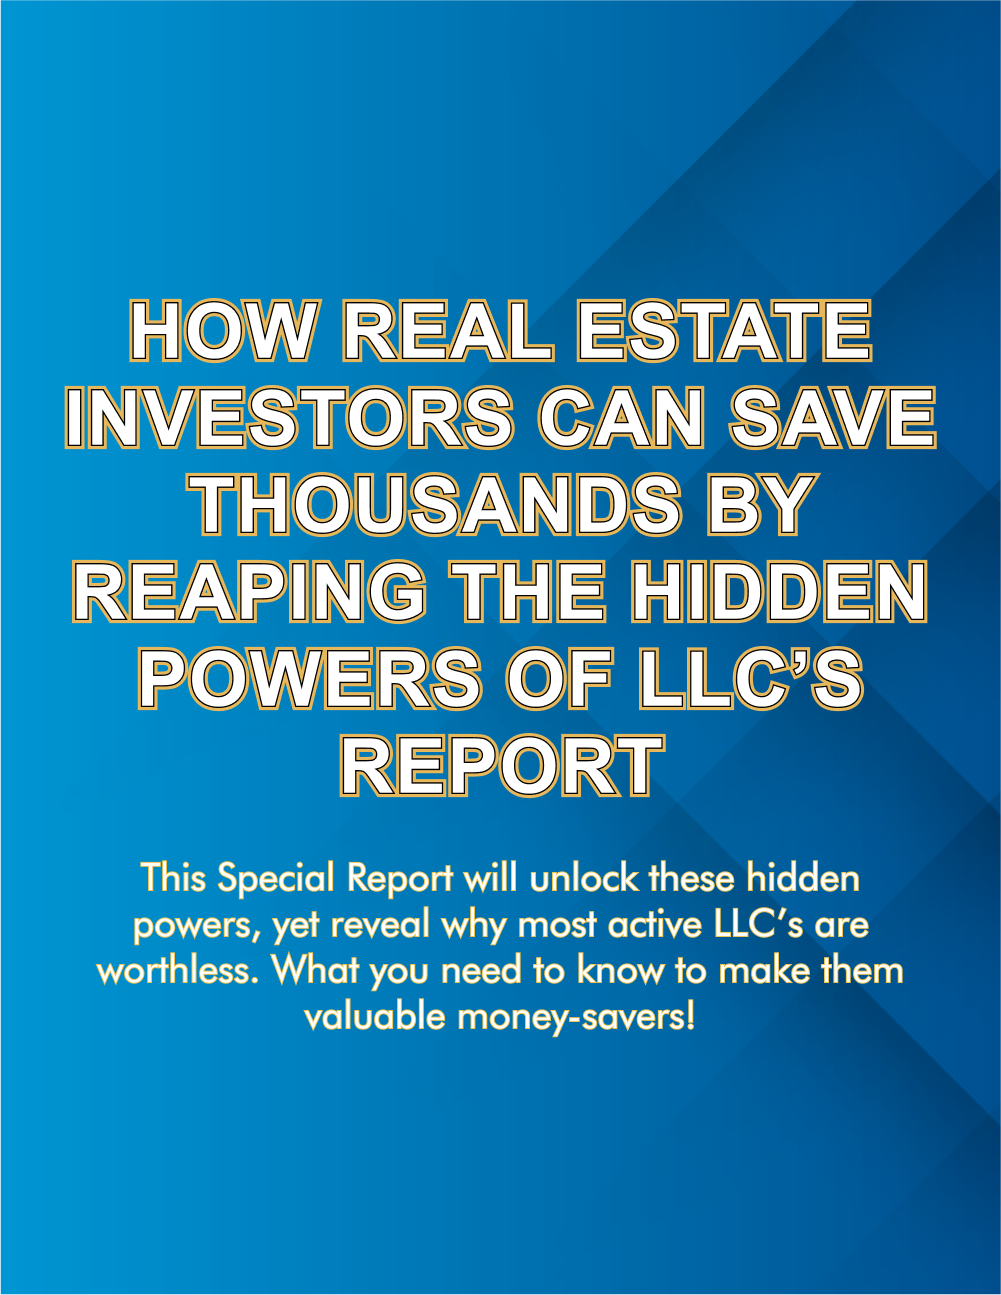 How Real Estate Investors Can Save Thousands By Reaping The Hidden POWERS of LLC’s  Report